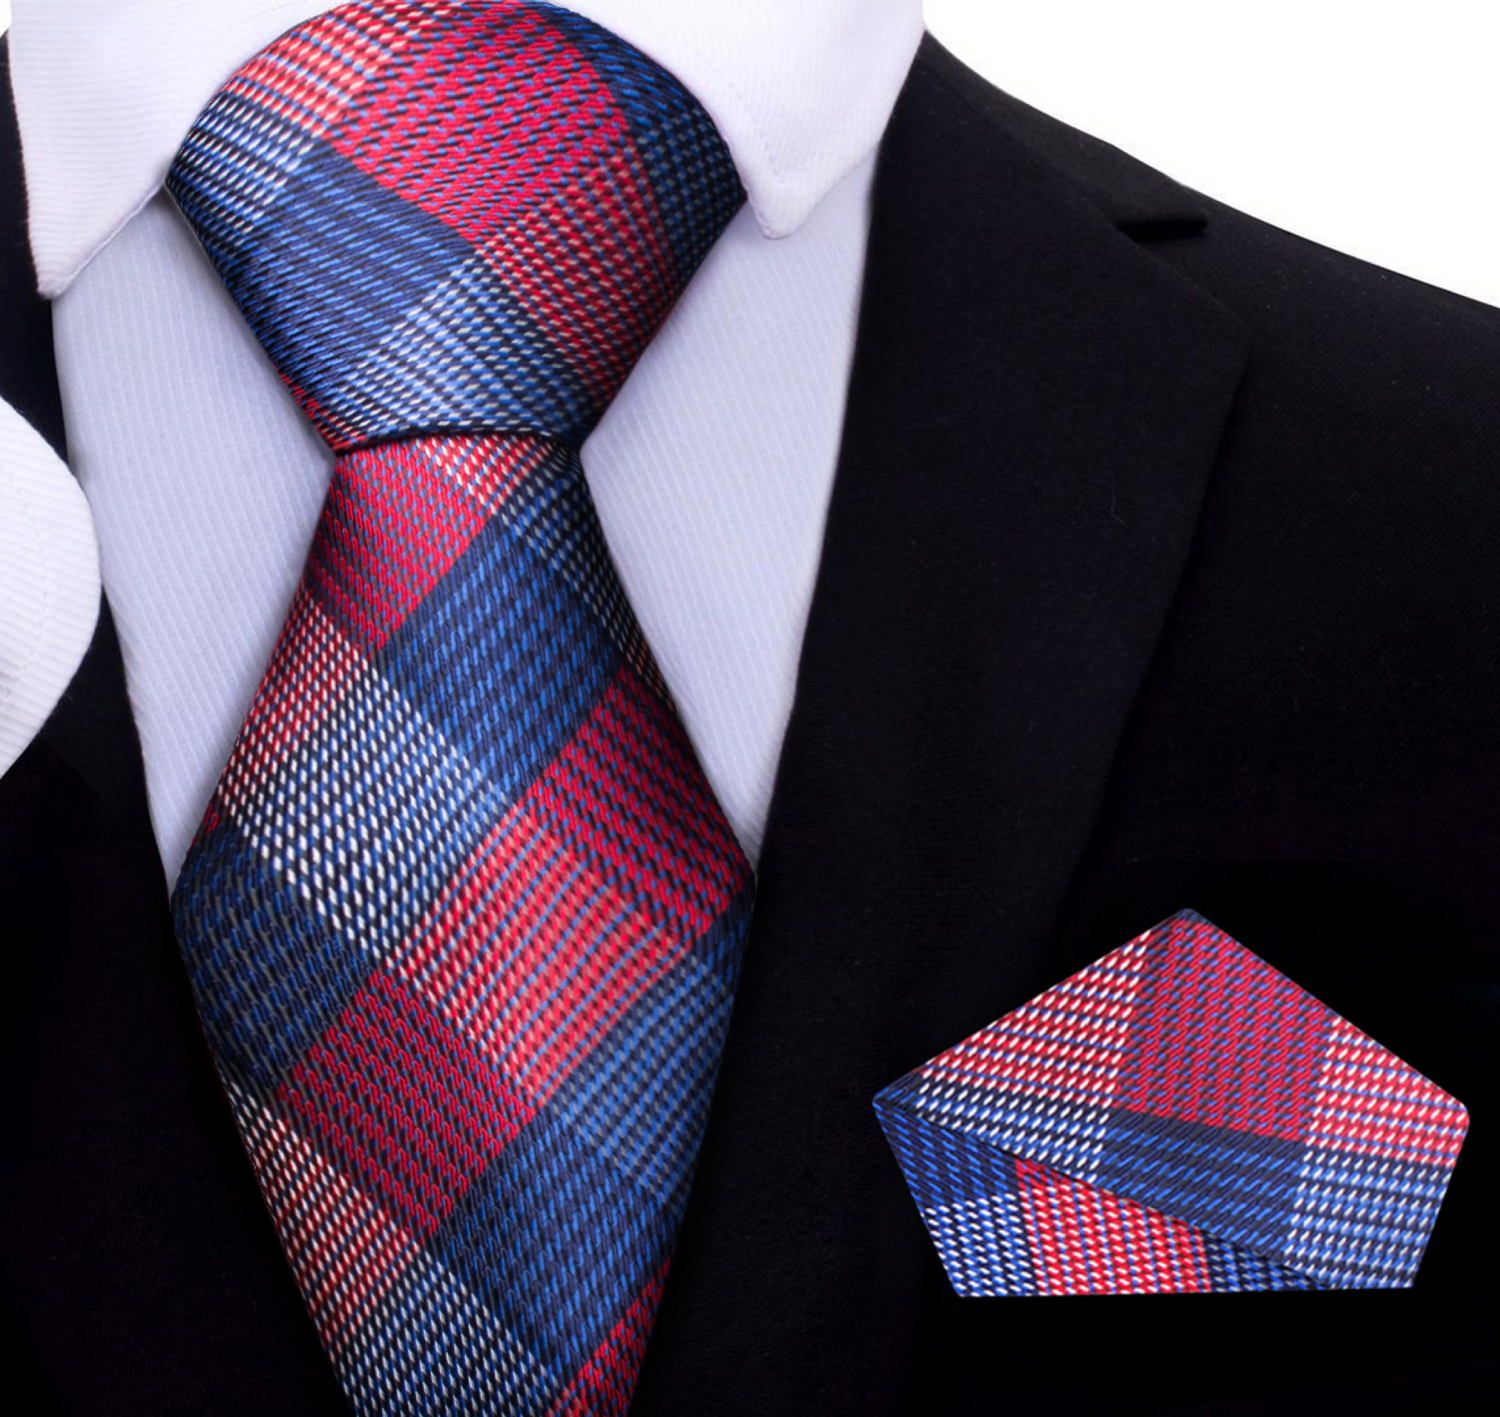 Red and Blue Plaid Tie and Blue and Pocket Square